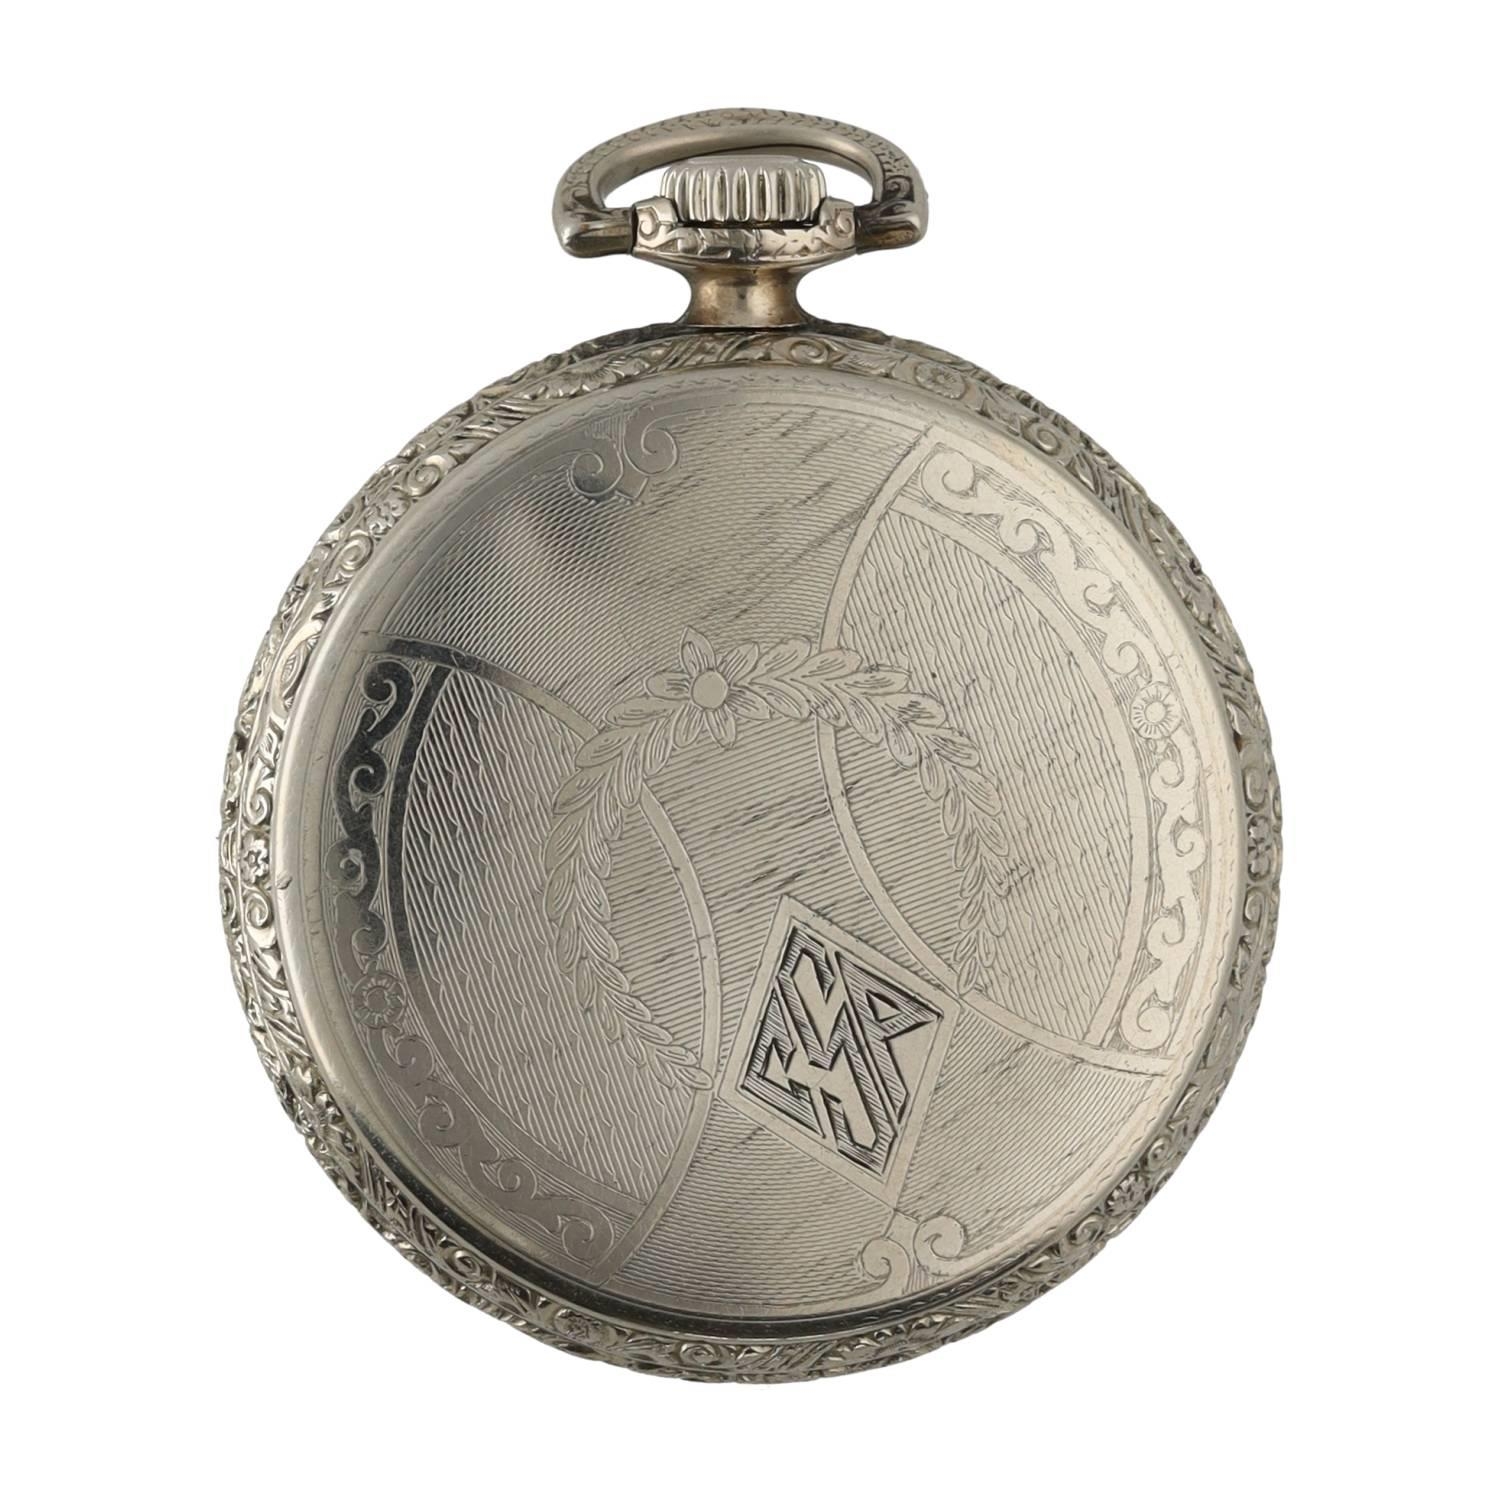 Elgin National Watch Co. 'Artistic' lever pocket watch, circa 1925, serial no. 28567200, signed 17 - Image 4 of 4